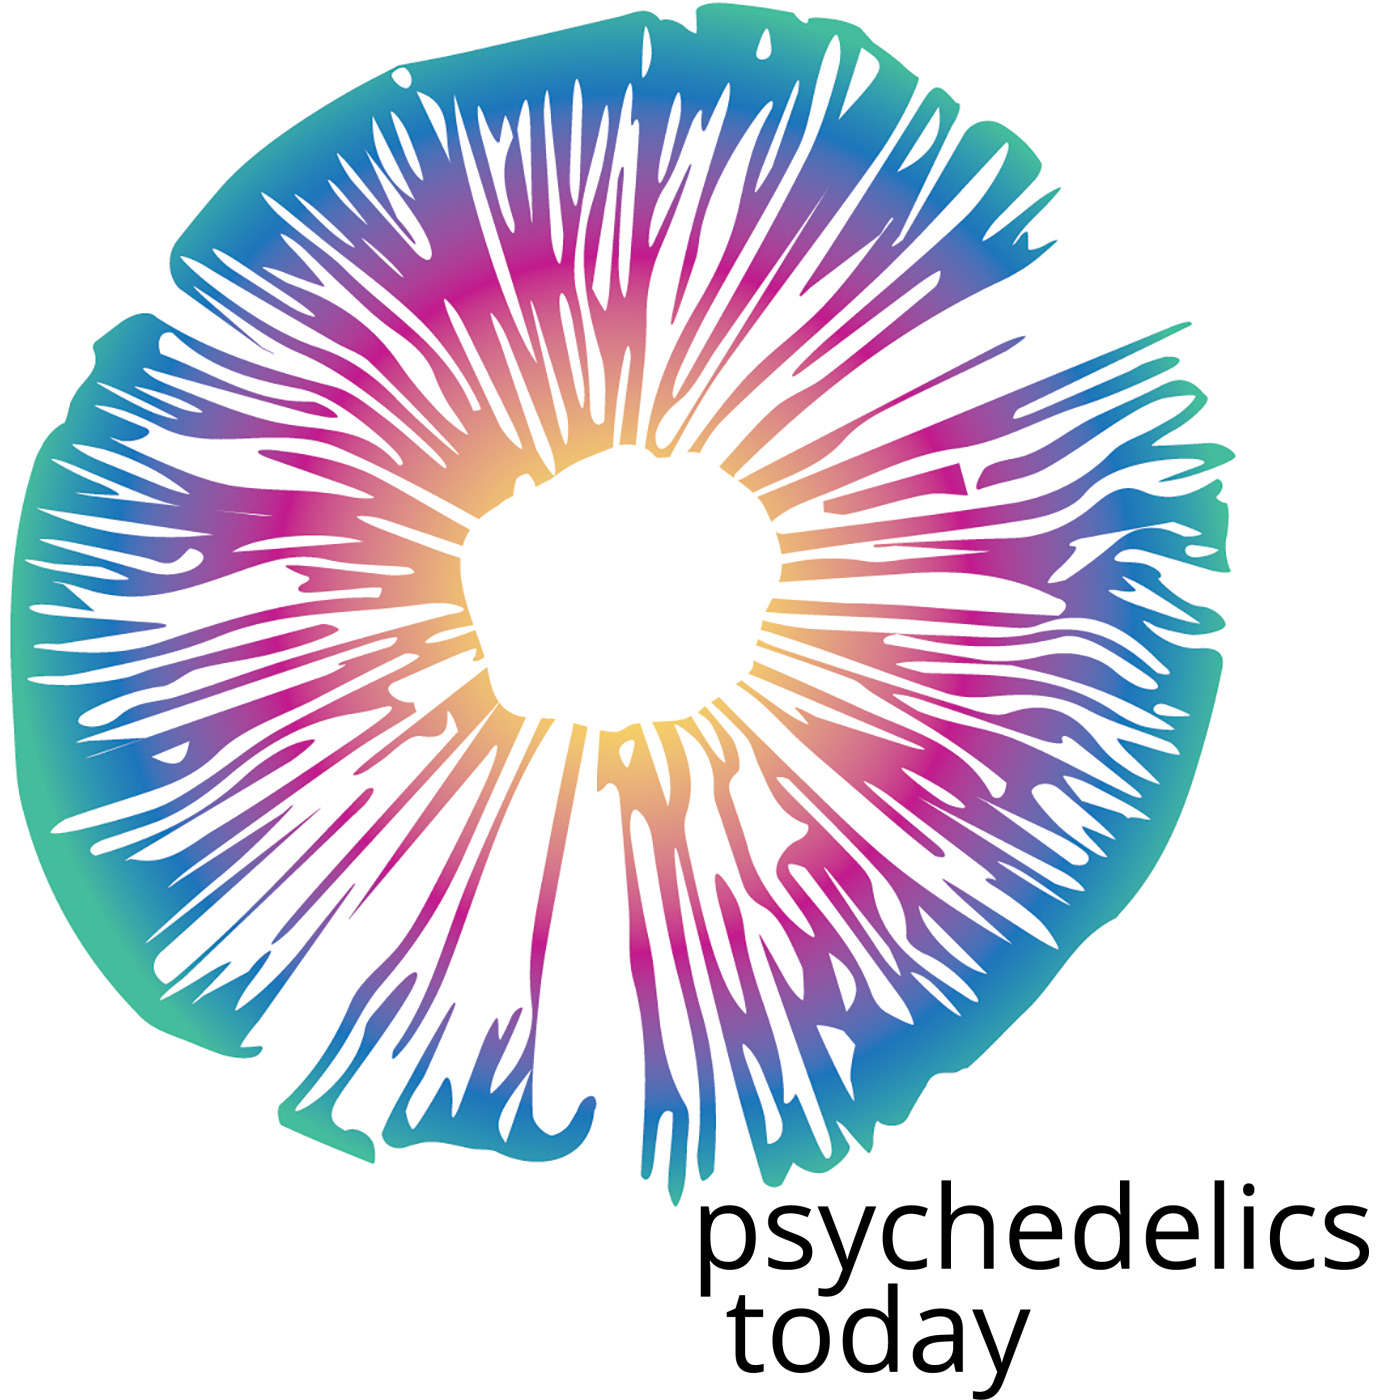 Why Hamilton Joined COMPASS Pathways to Research New Psychedelic Compounds